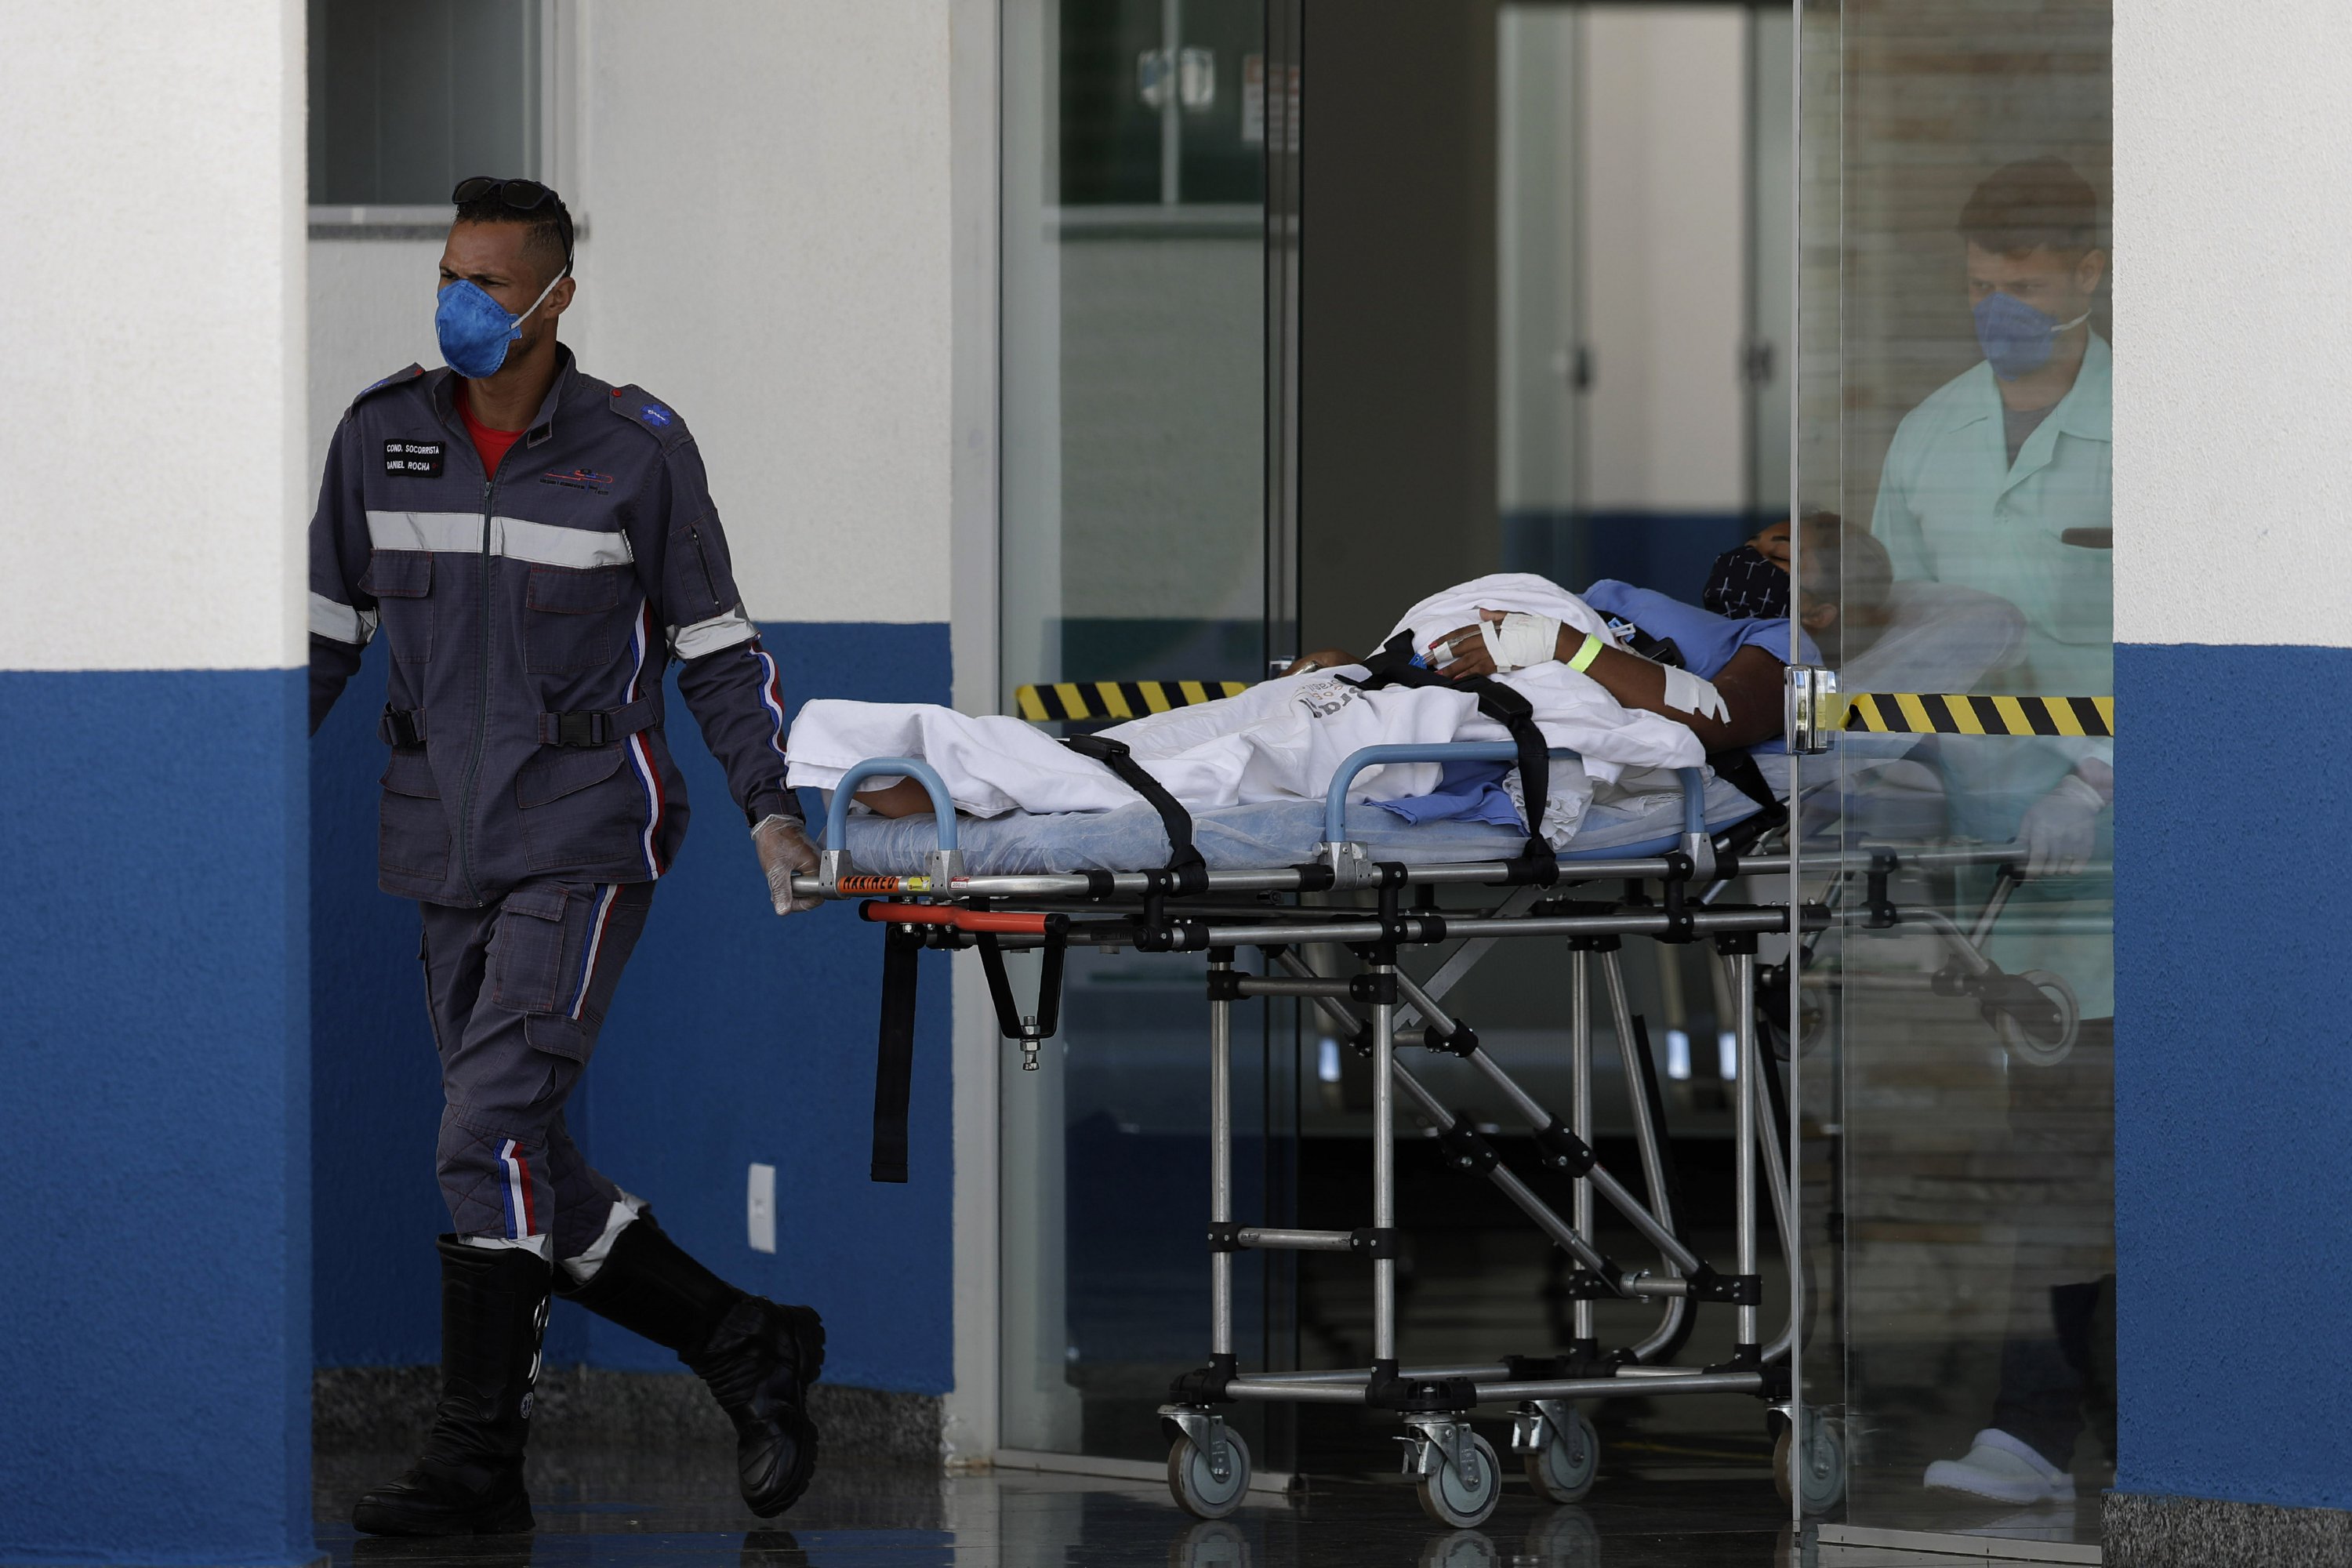 Brazil’s death toll is above 250,000, and viruses are still high